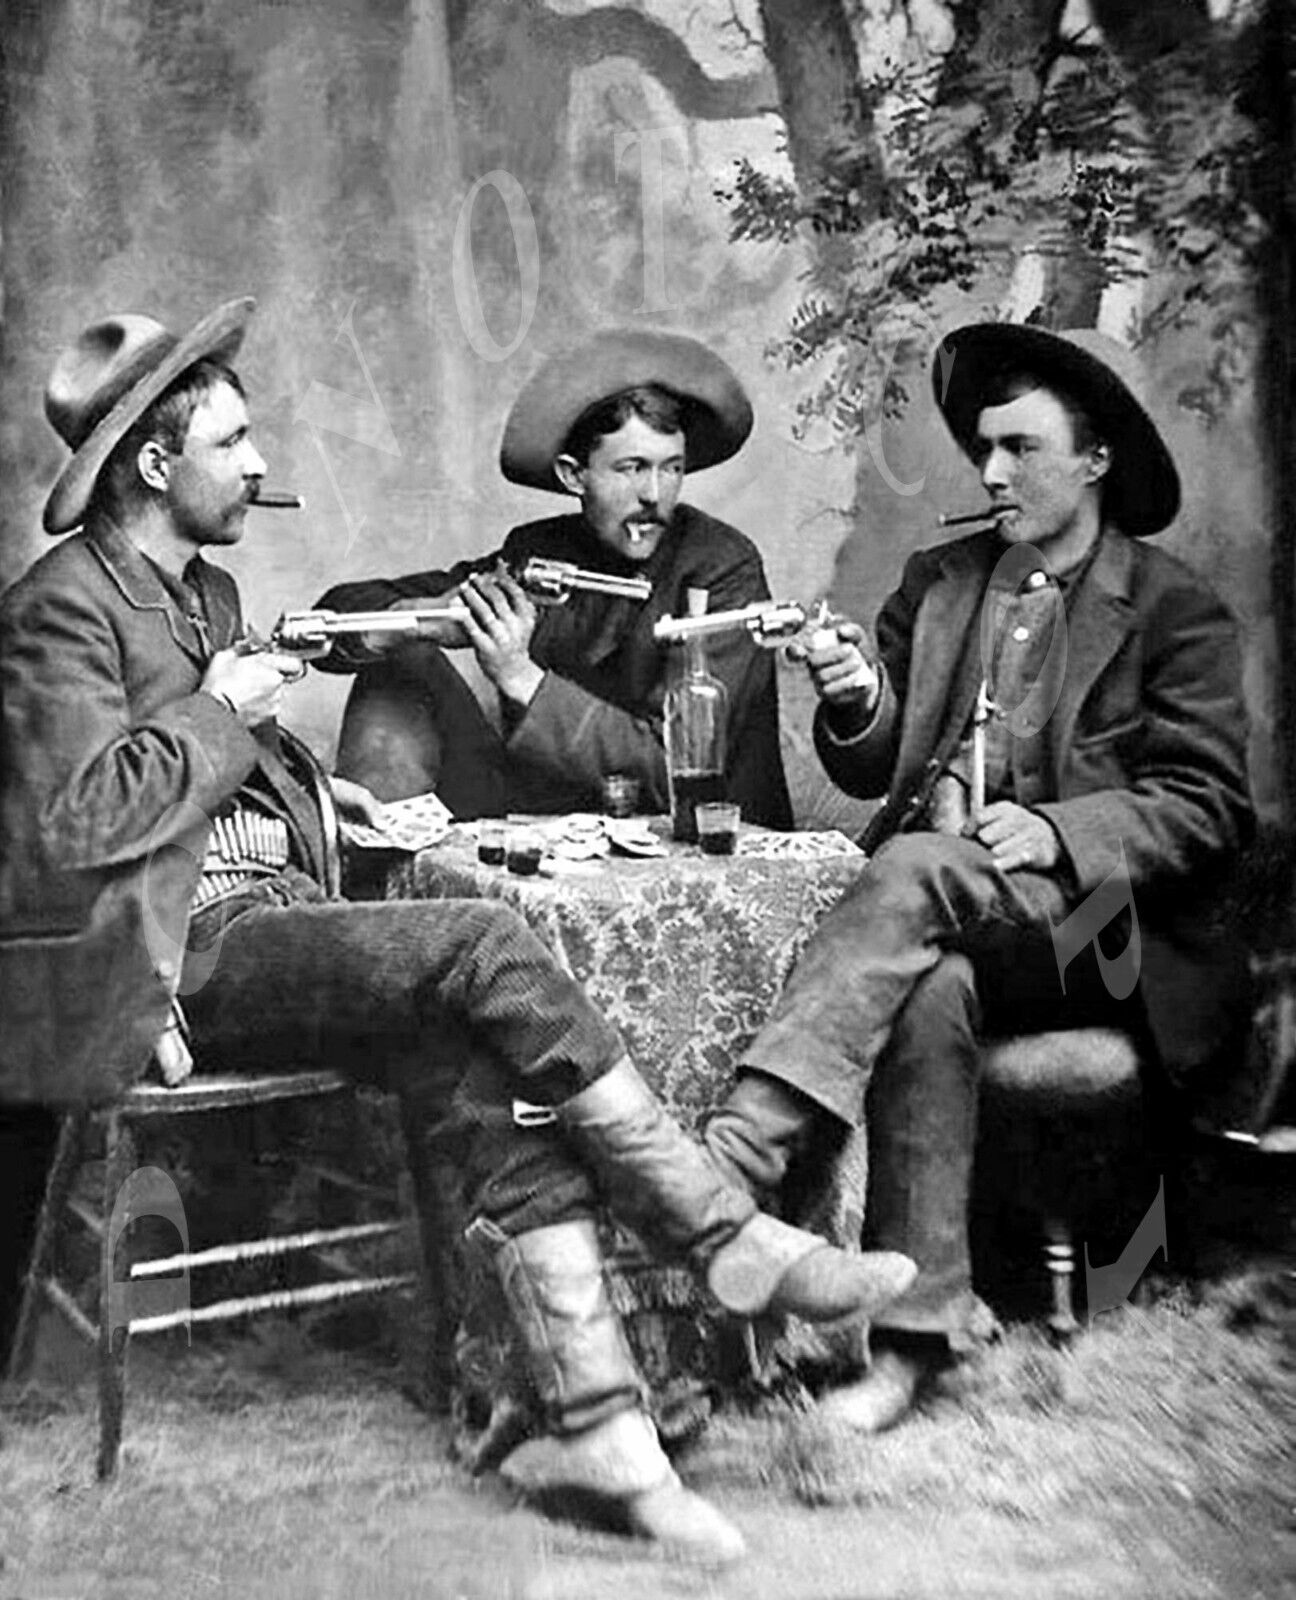 ANTIQUE OLD WEST 8X10 REPRO INTERIOR PHOTO PRINT OF WESTERN POKER GAMBLING TABLE